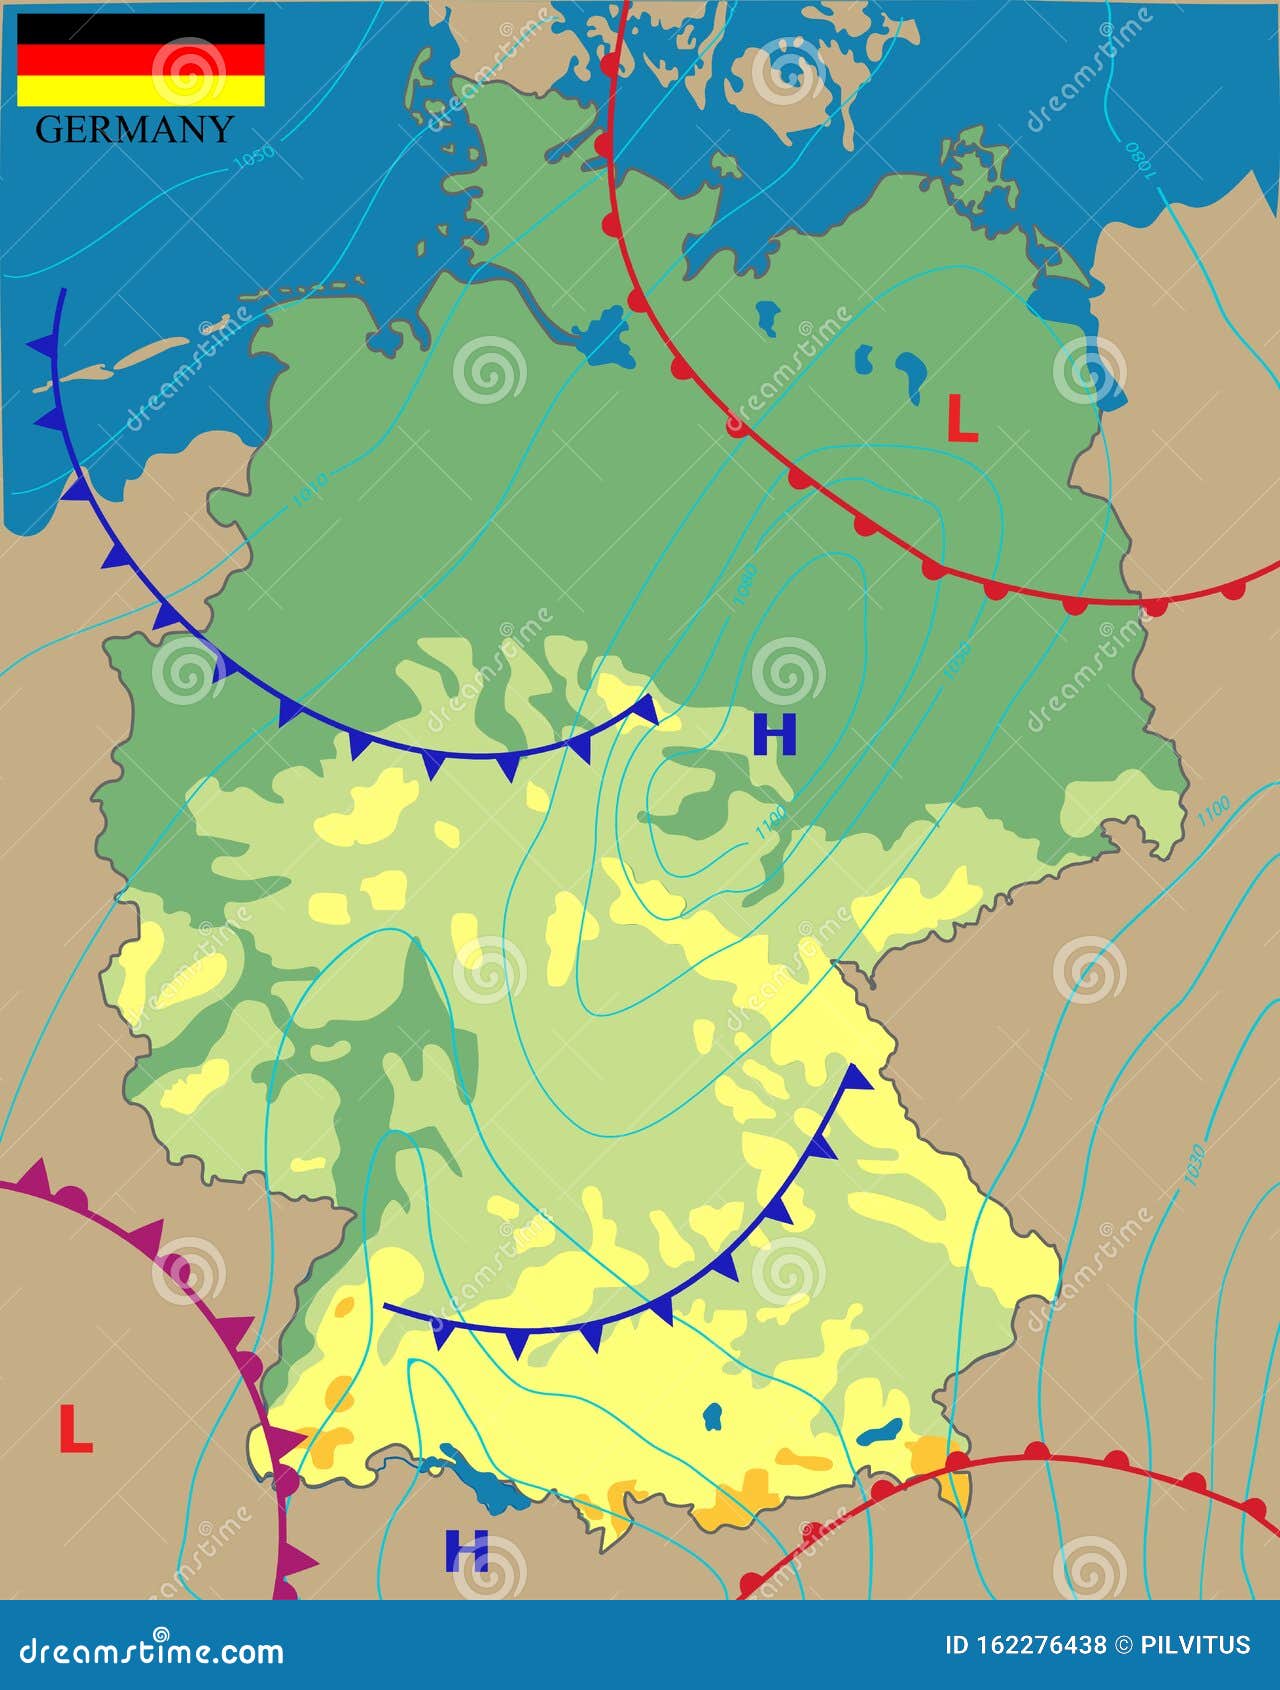 Realistic Weather Map of the Germany Showing Isobars and Weather Fronts